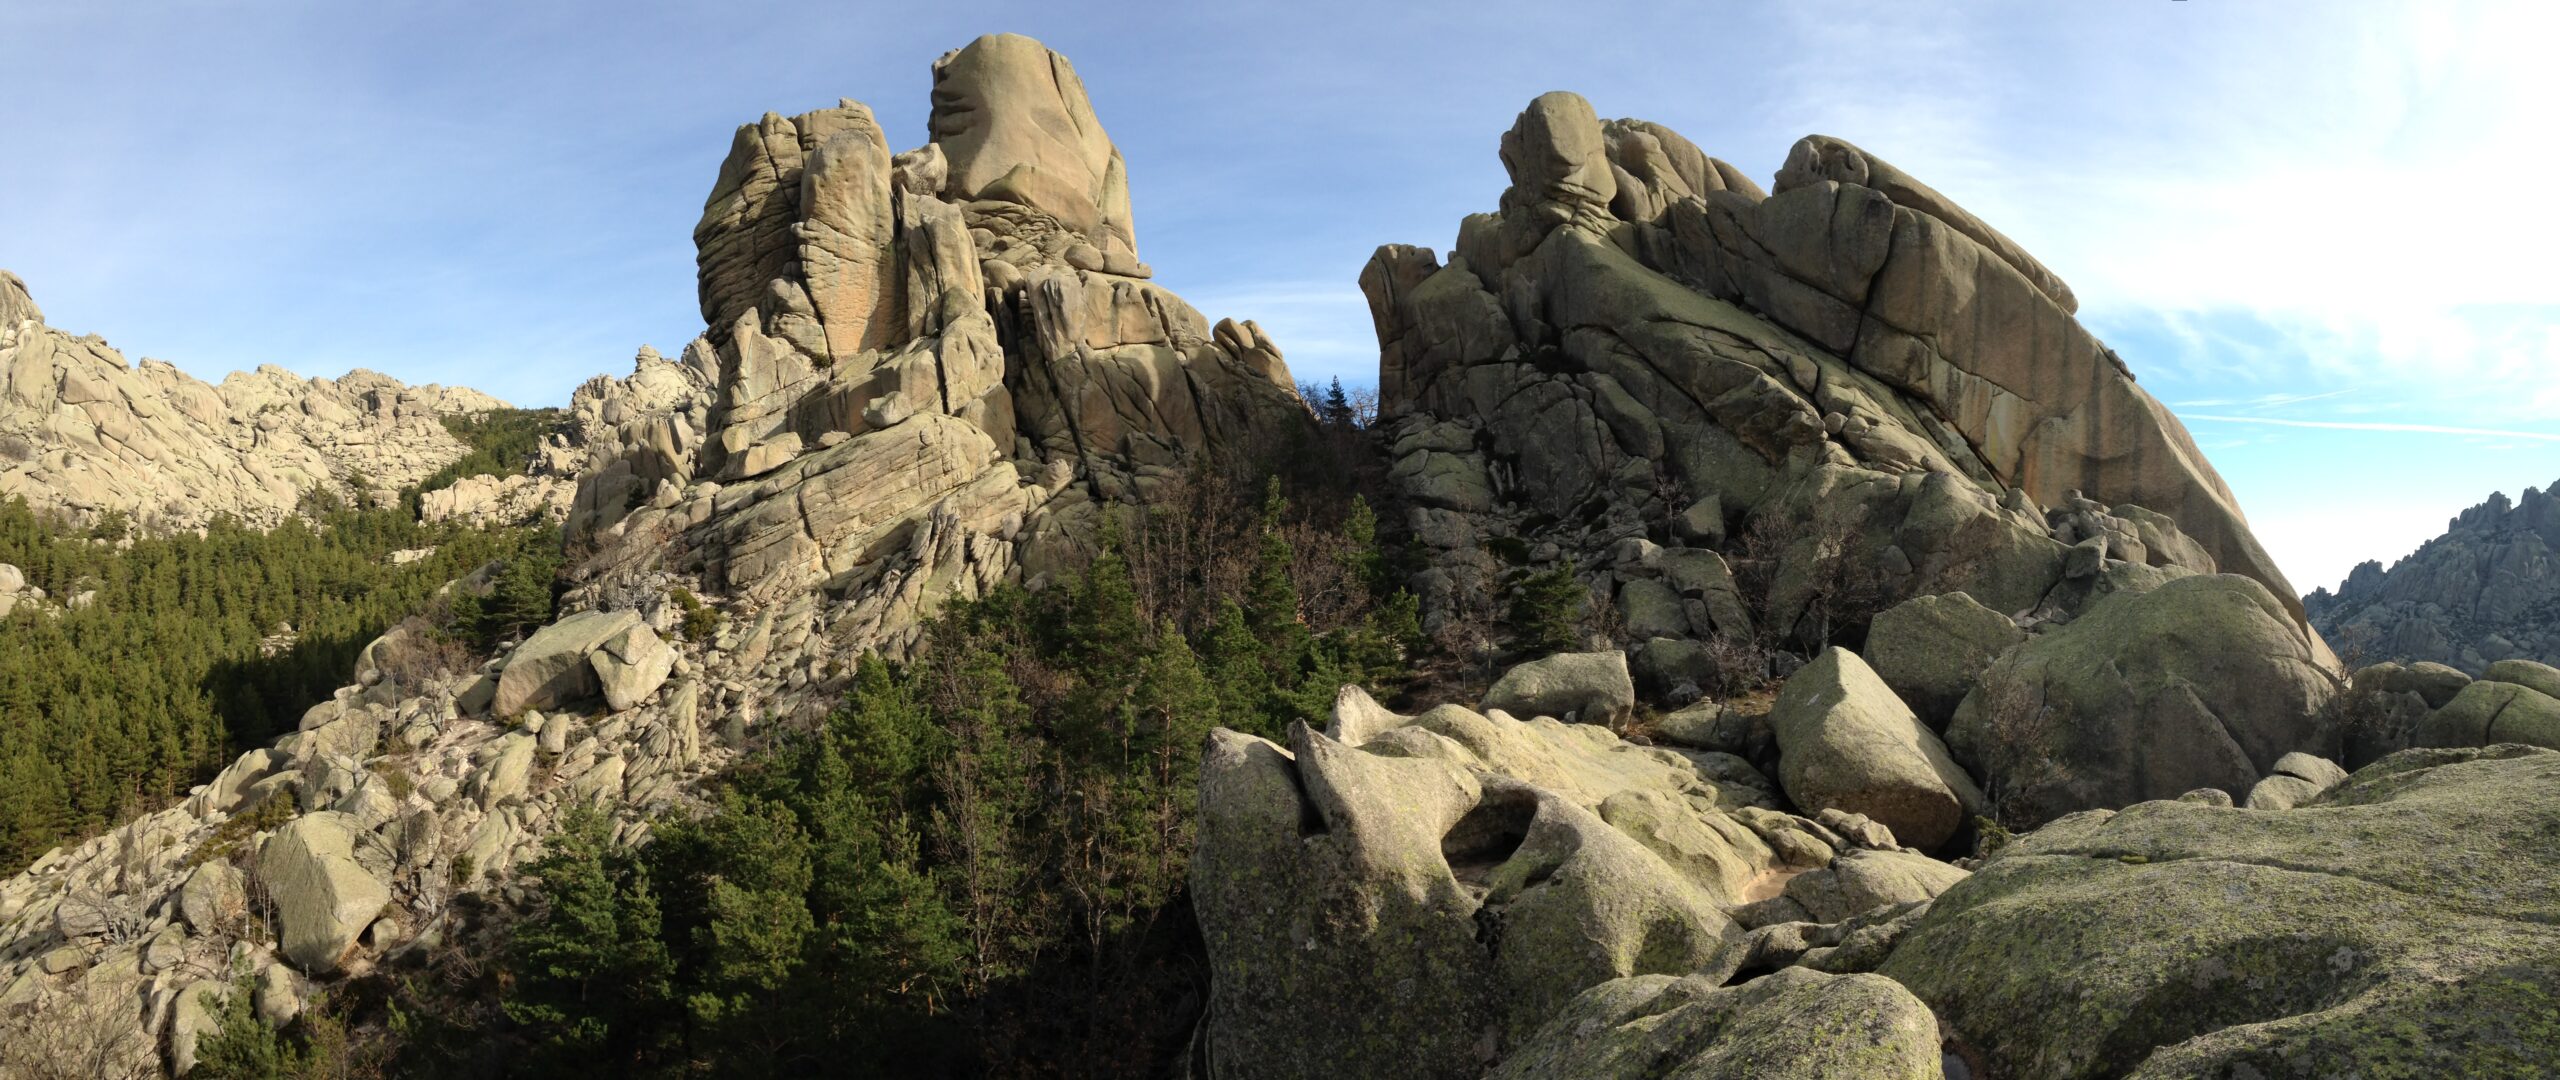 Iscover Forms In The Big Amount Of Rocks Of La Pedriza In Our 2 Day Hike And Camp In La Pedriza